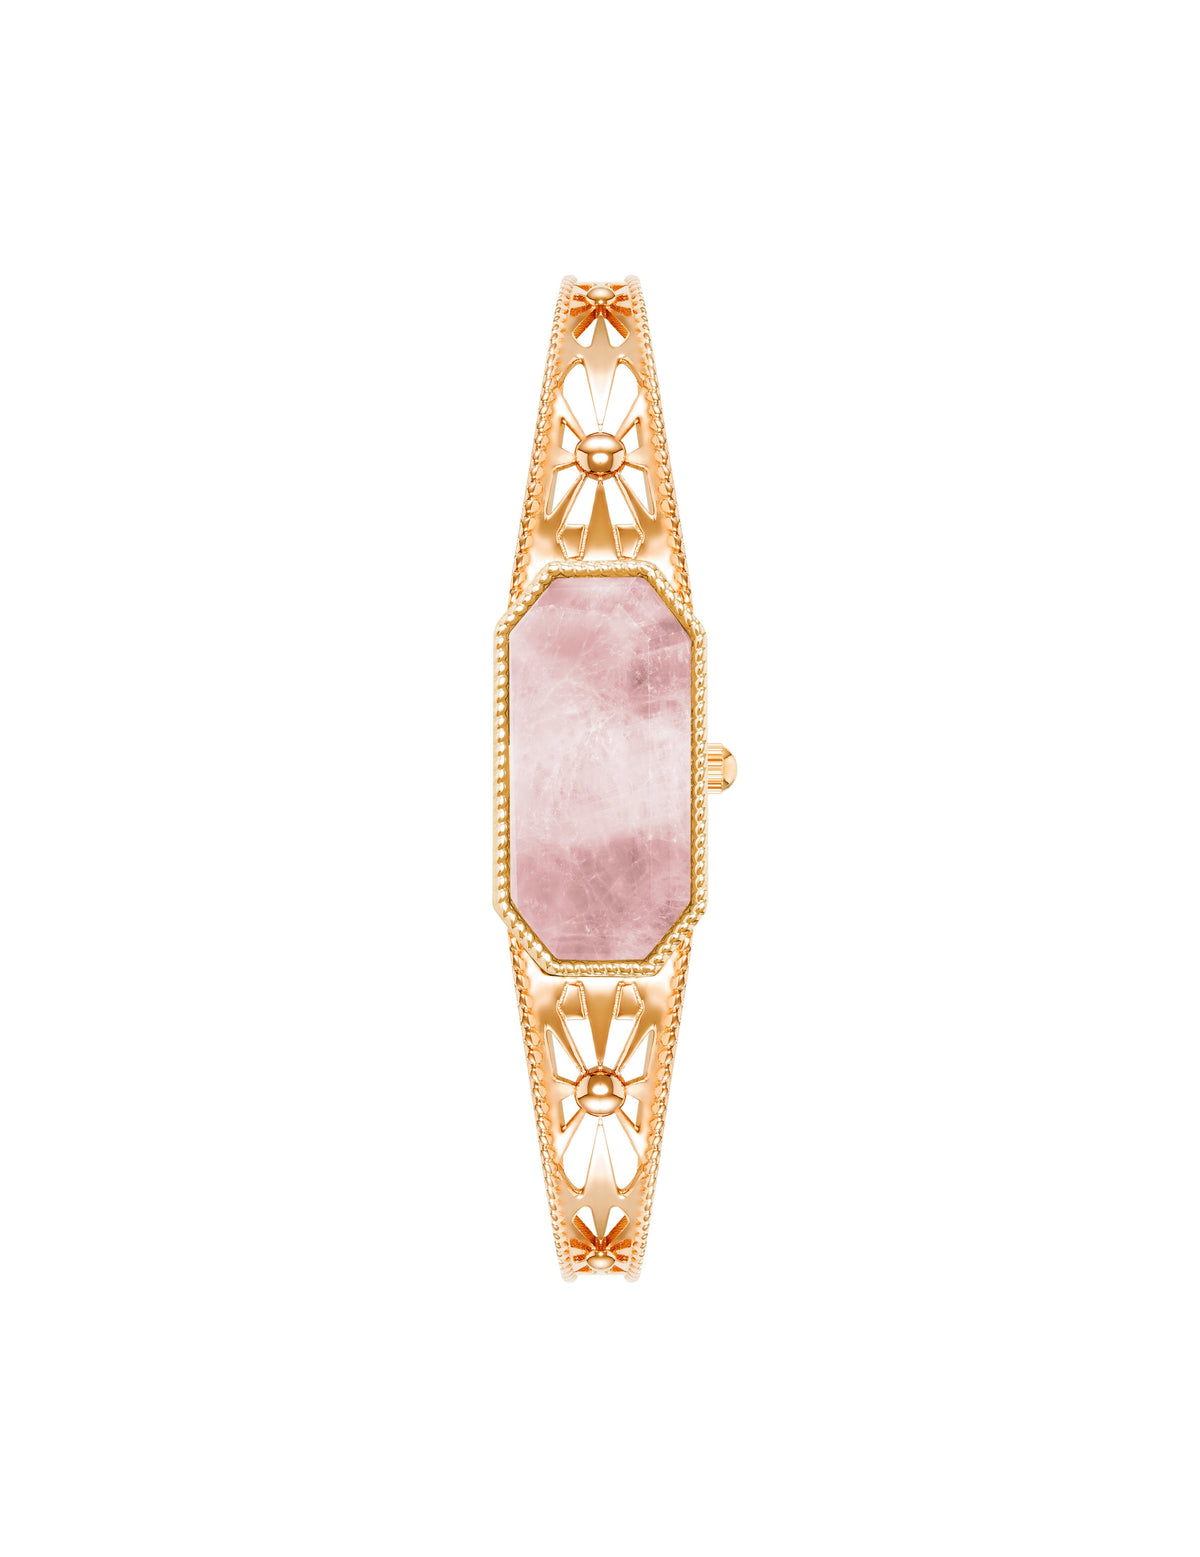 Anne Klein Rose Gold-Tone/ Pink Gemstone Covered Dial Watch